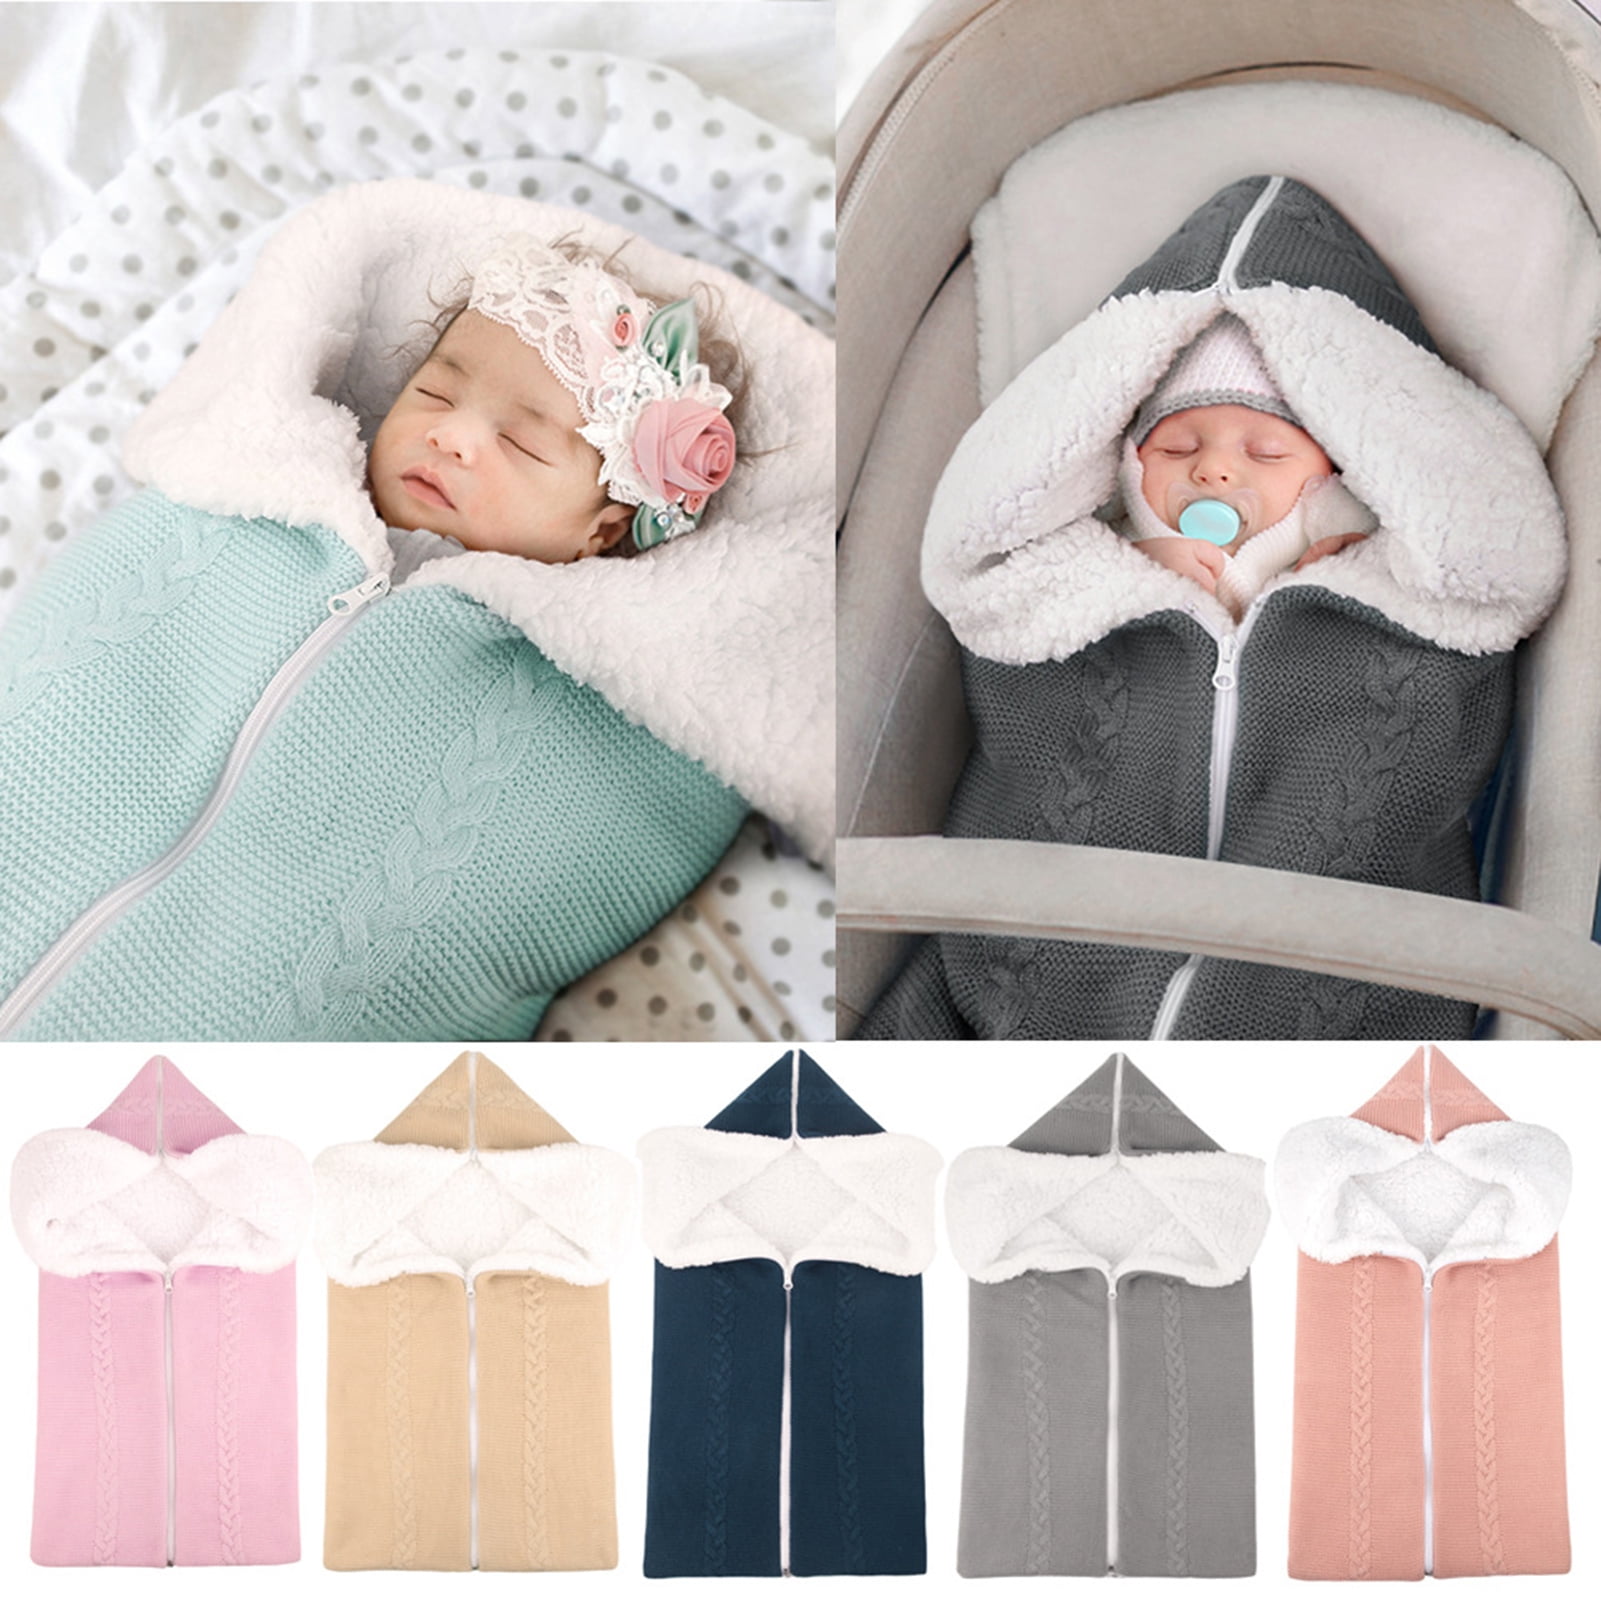 Comfy Cubs Sleep Bag, Sack for Baby, 2 Pack, Breathable Wearable Blanket  Swaddle for Newborns and Toddlers, Cute and Comfortable Onesie, Cotton